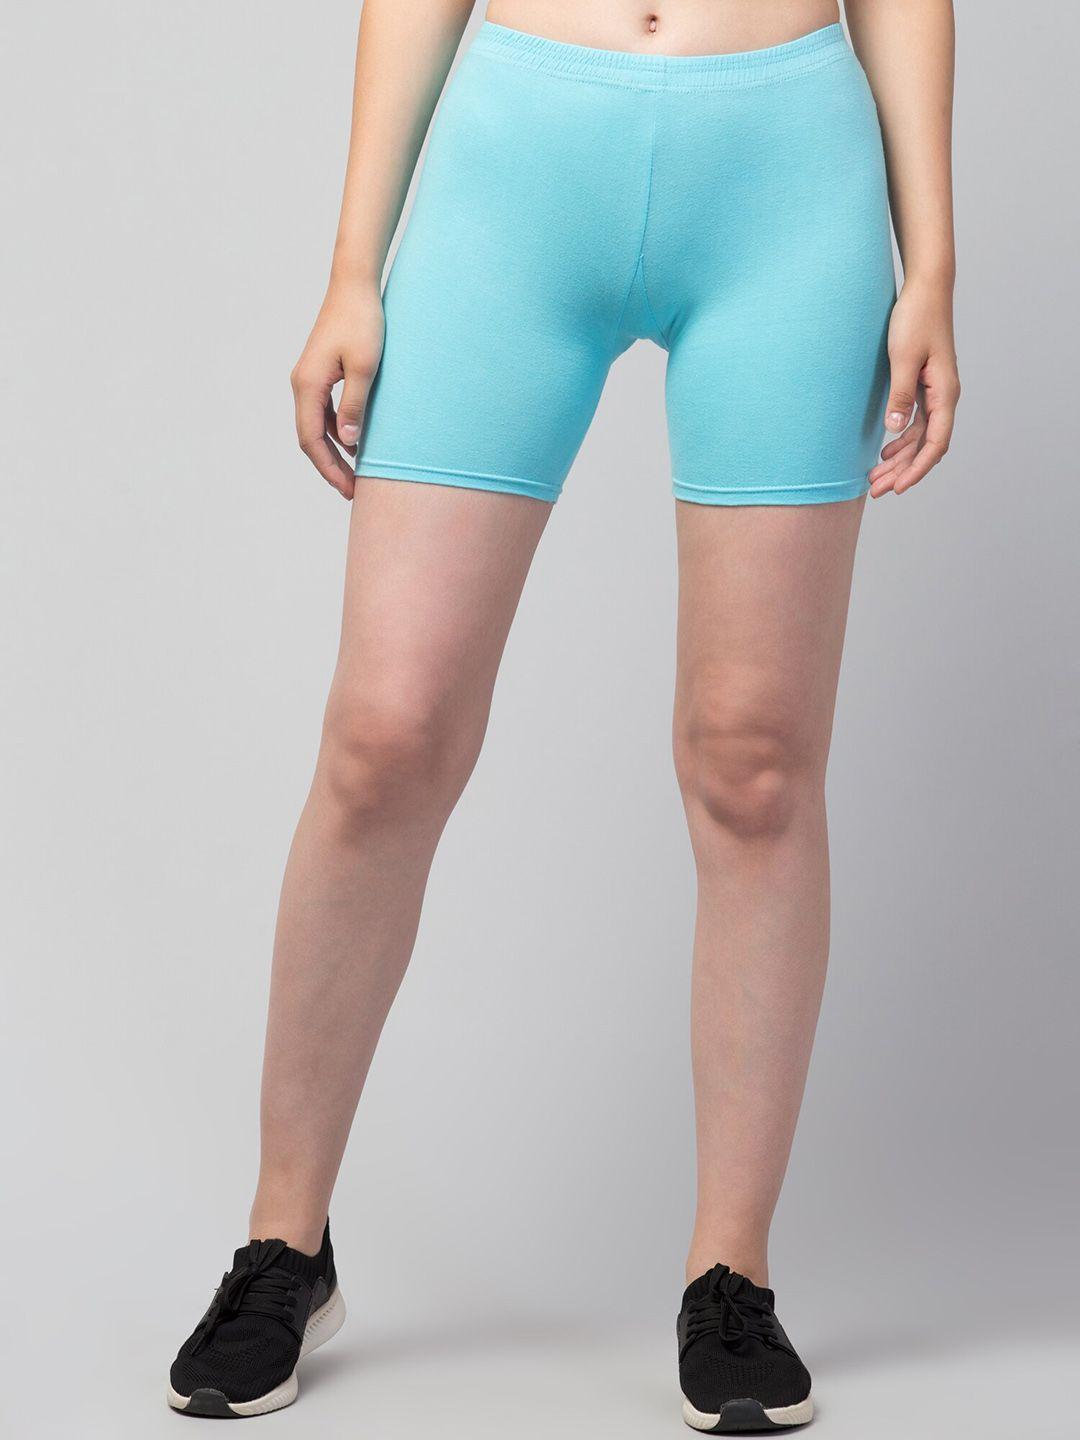 apraa & parma women turquoise blue cycling sports shorts